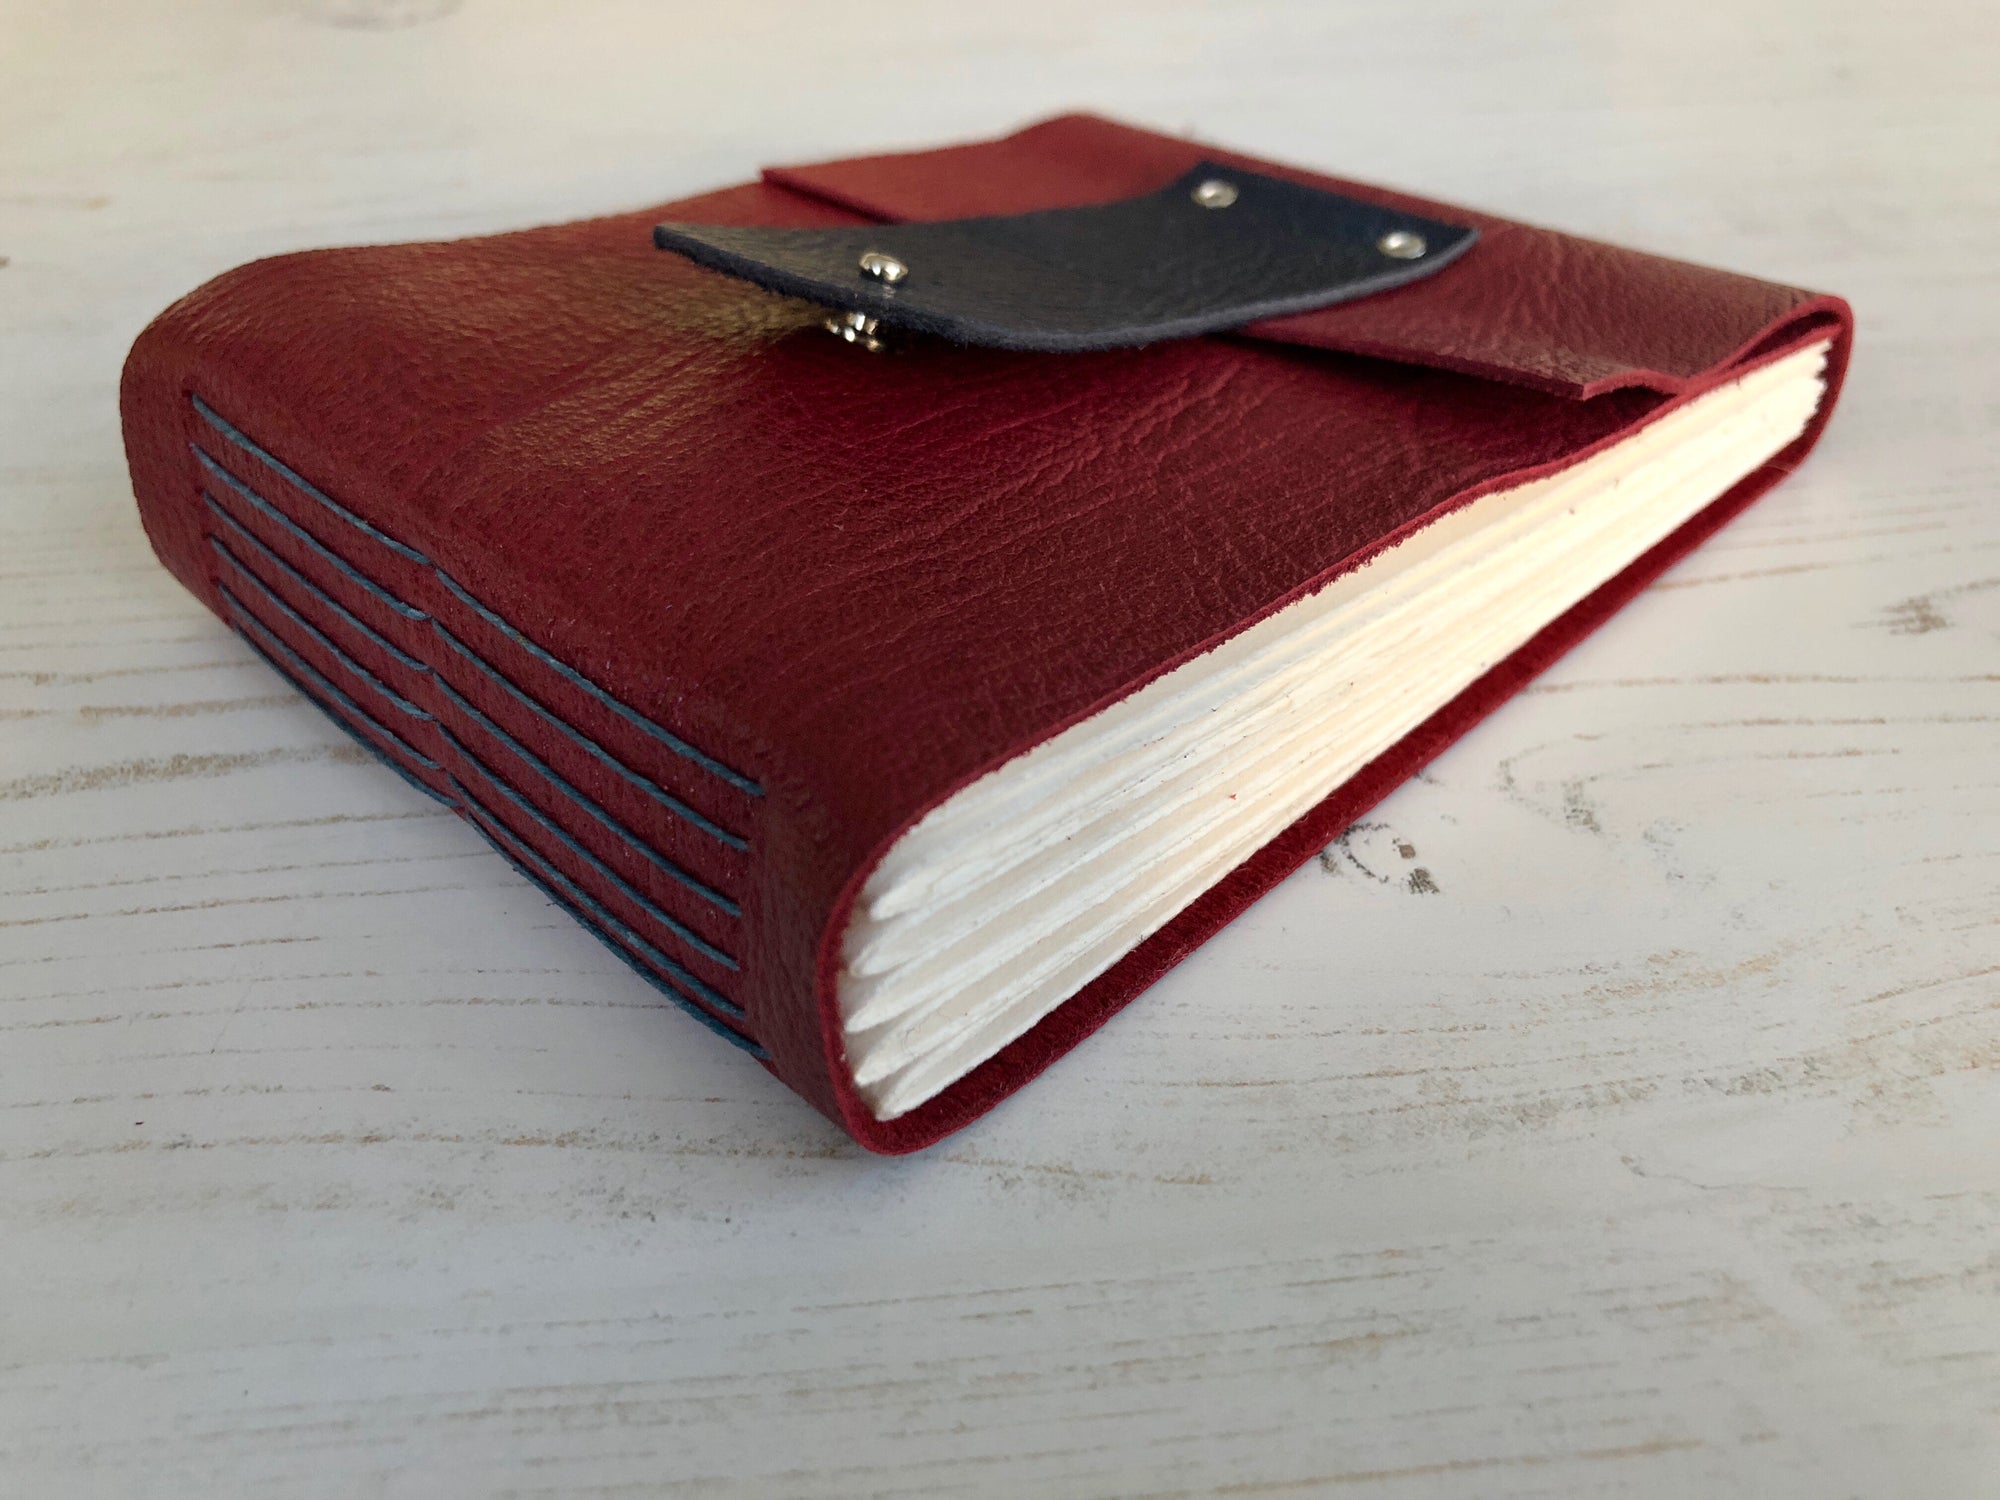 Longstitch Leather Sketchbook bound by hand in the UK